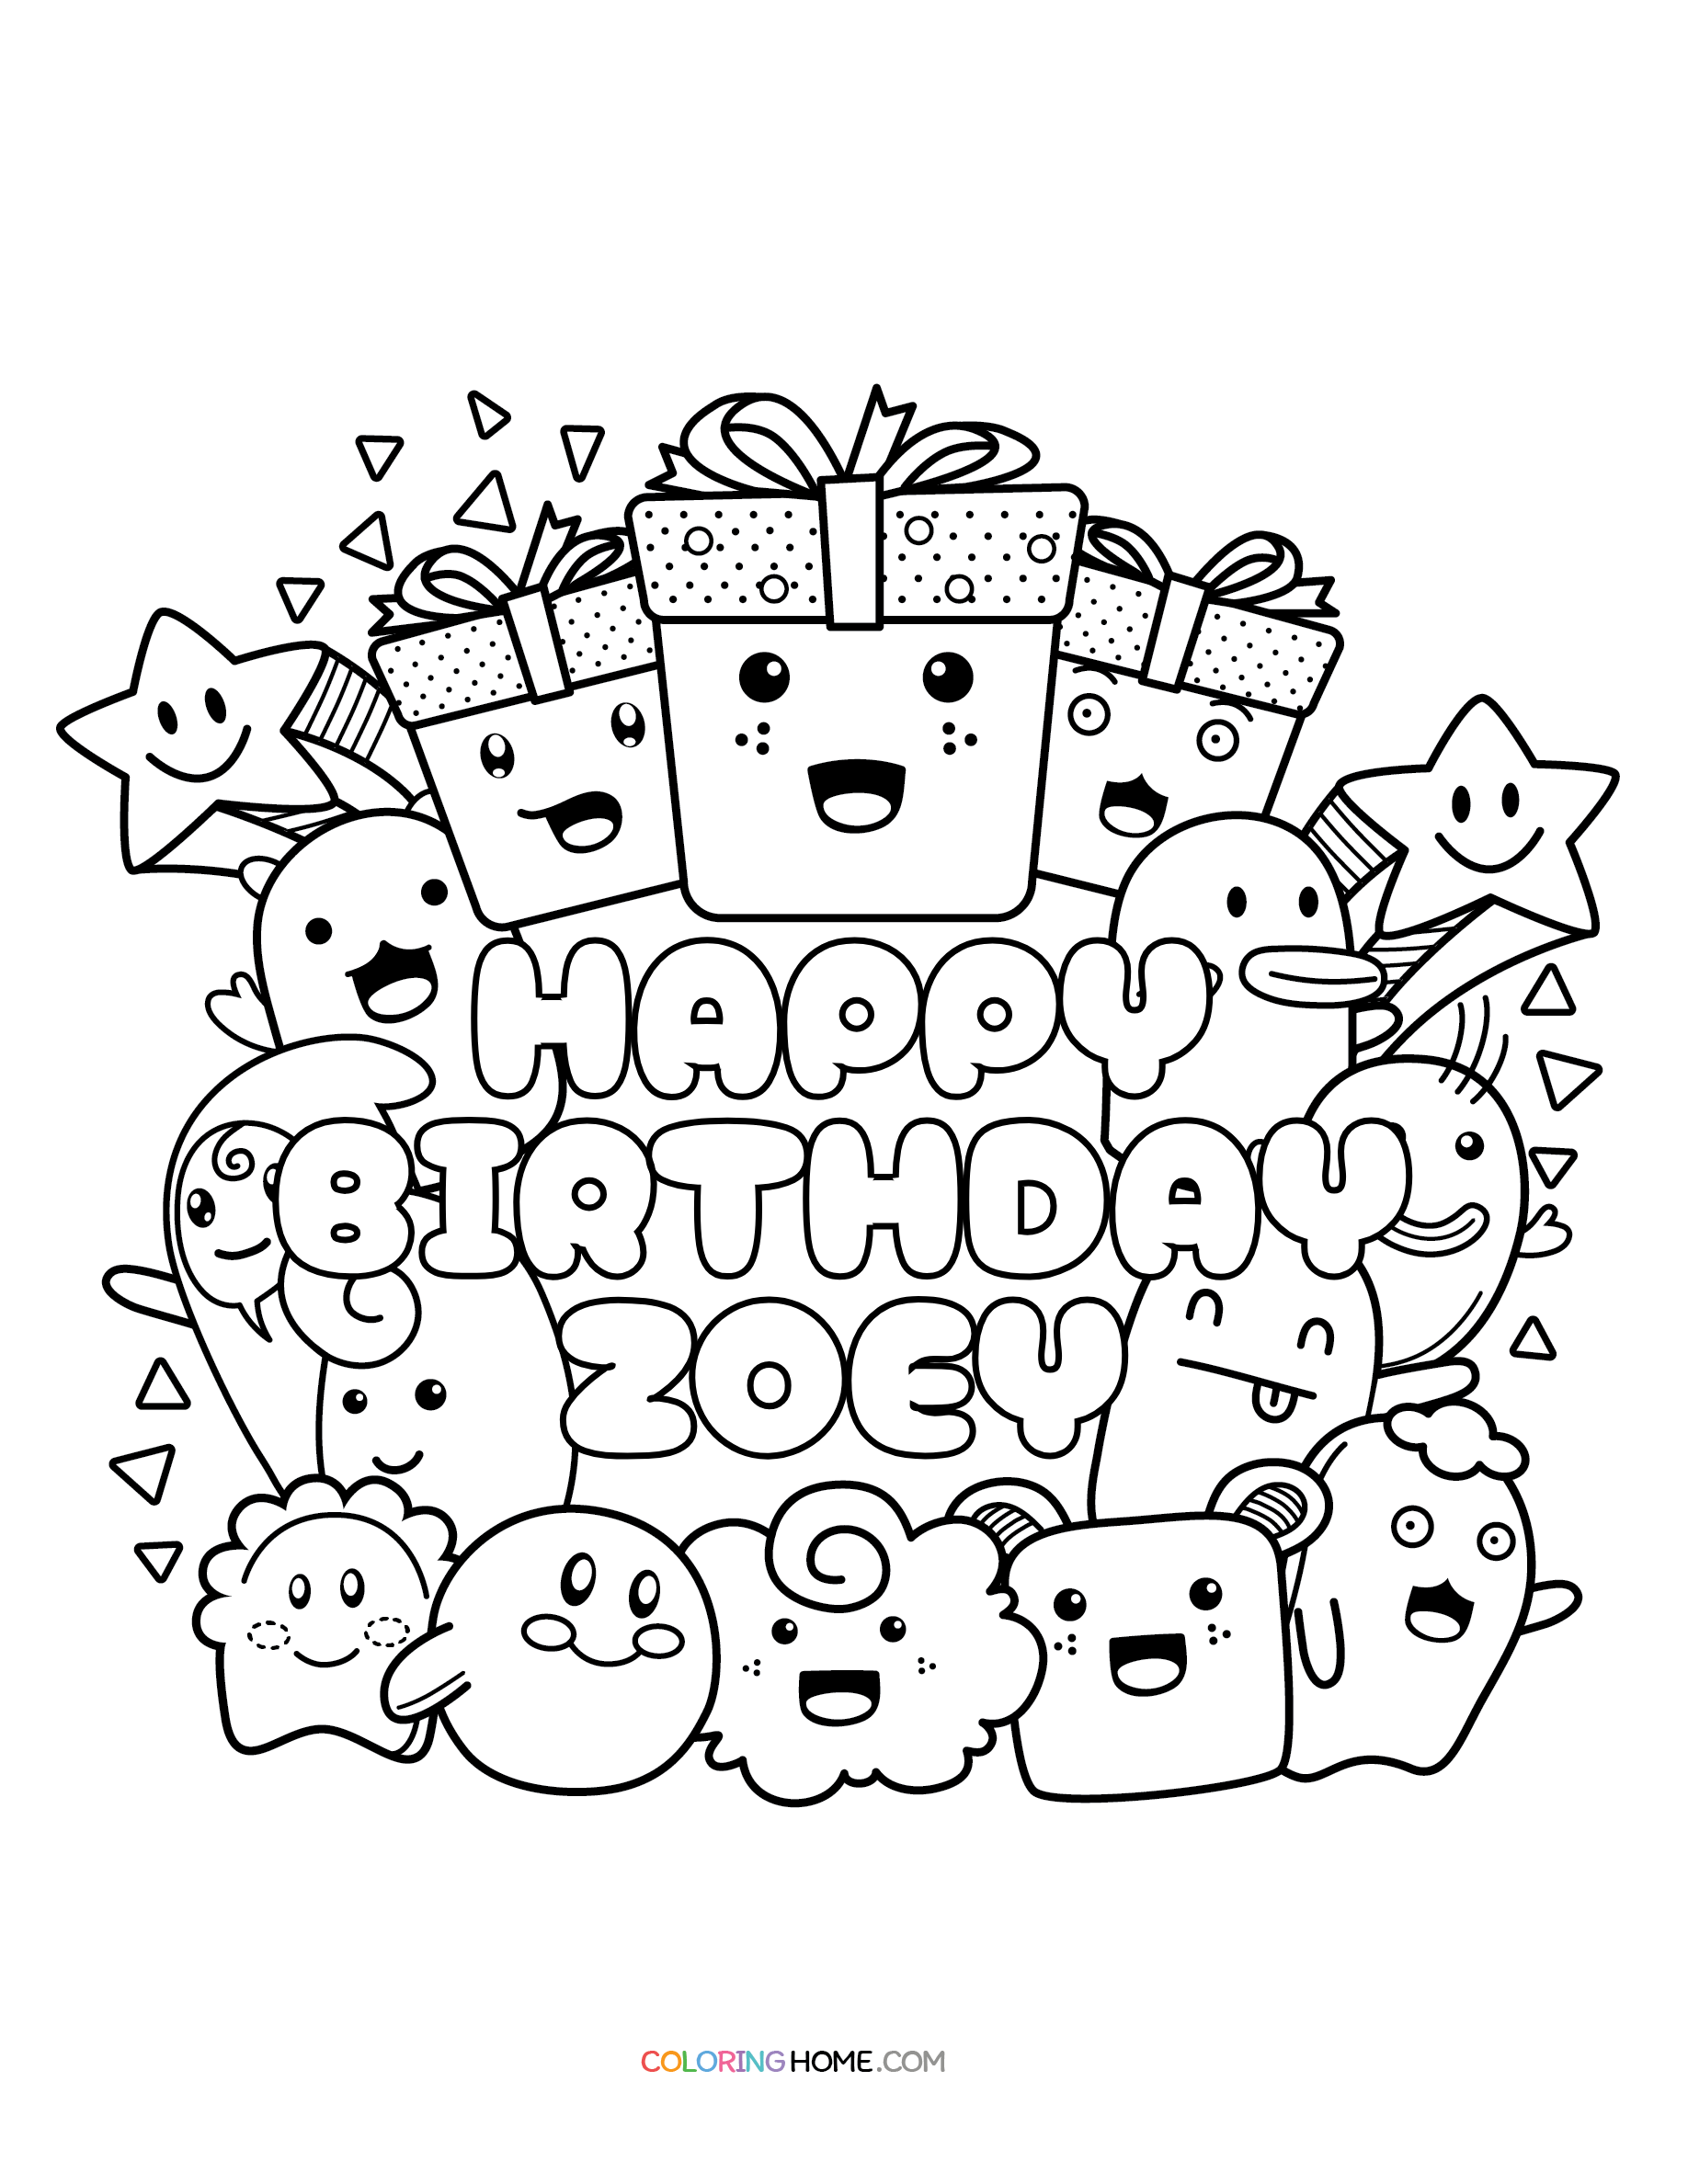 Happy Birthday Zoey coloring page